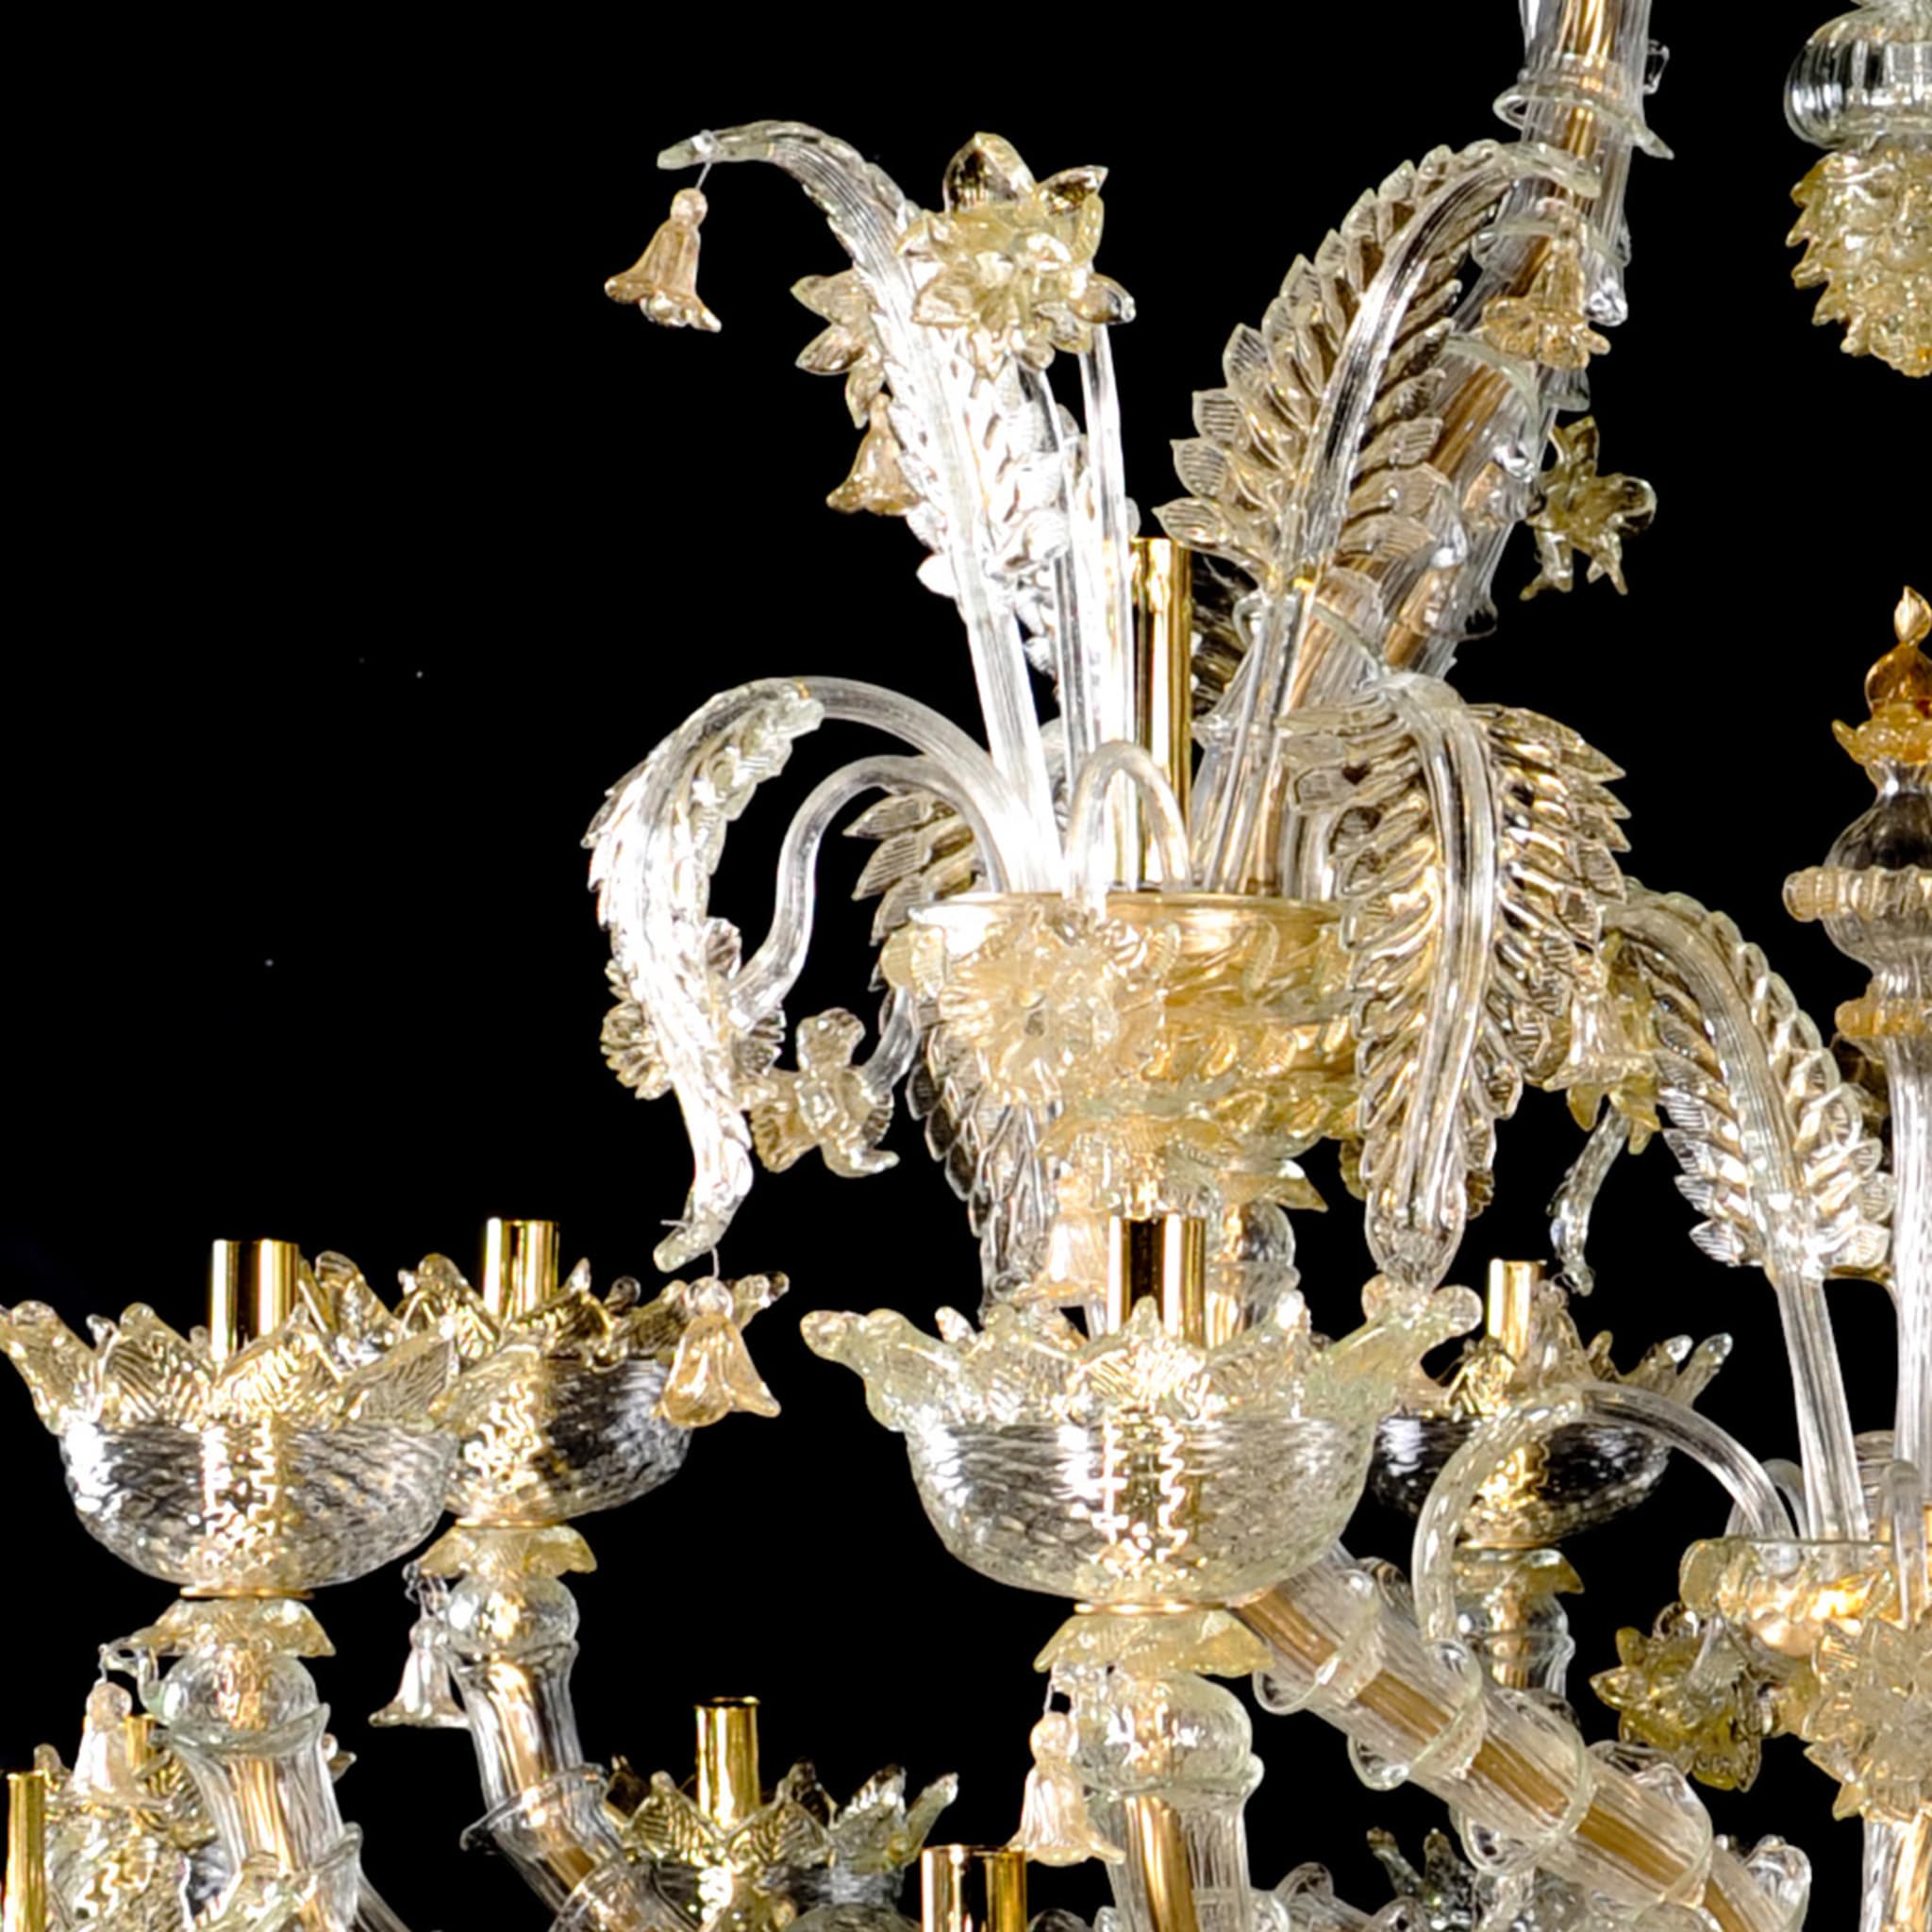 Rezzonico-style Gold and Crystal Chandelier #6 - Alternative view 4